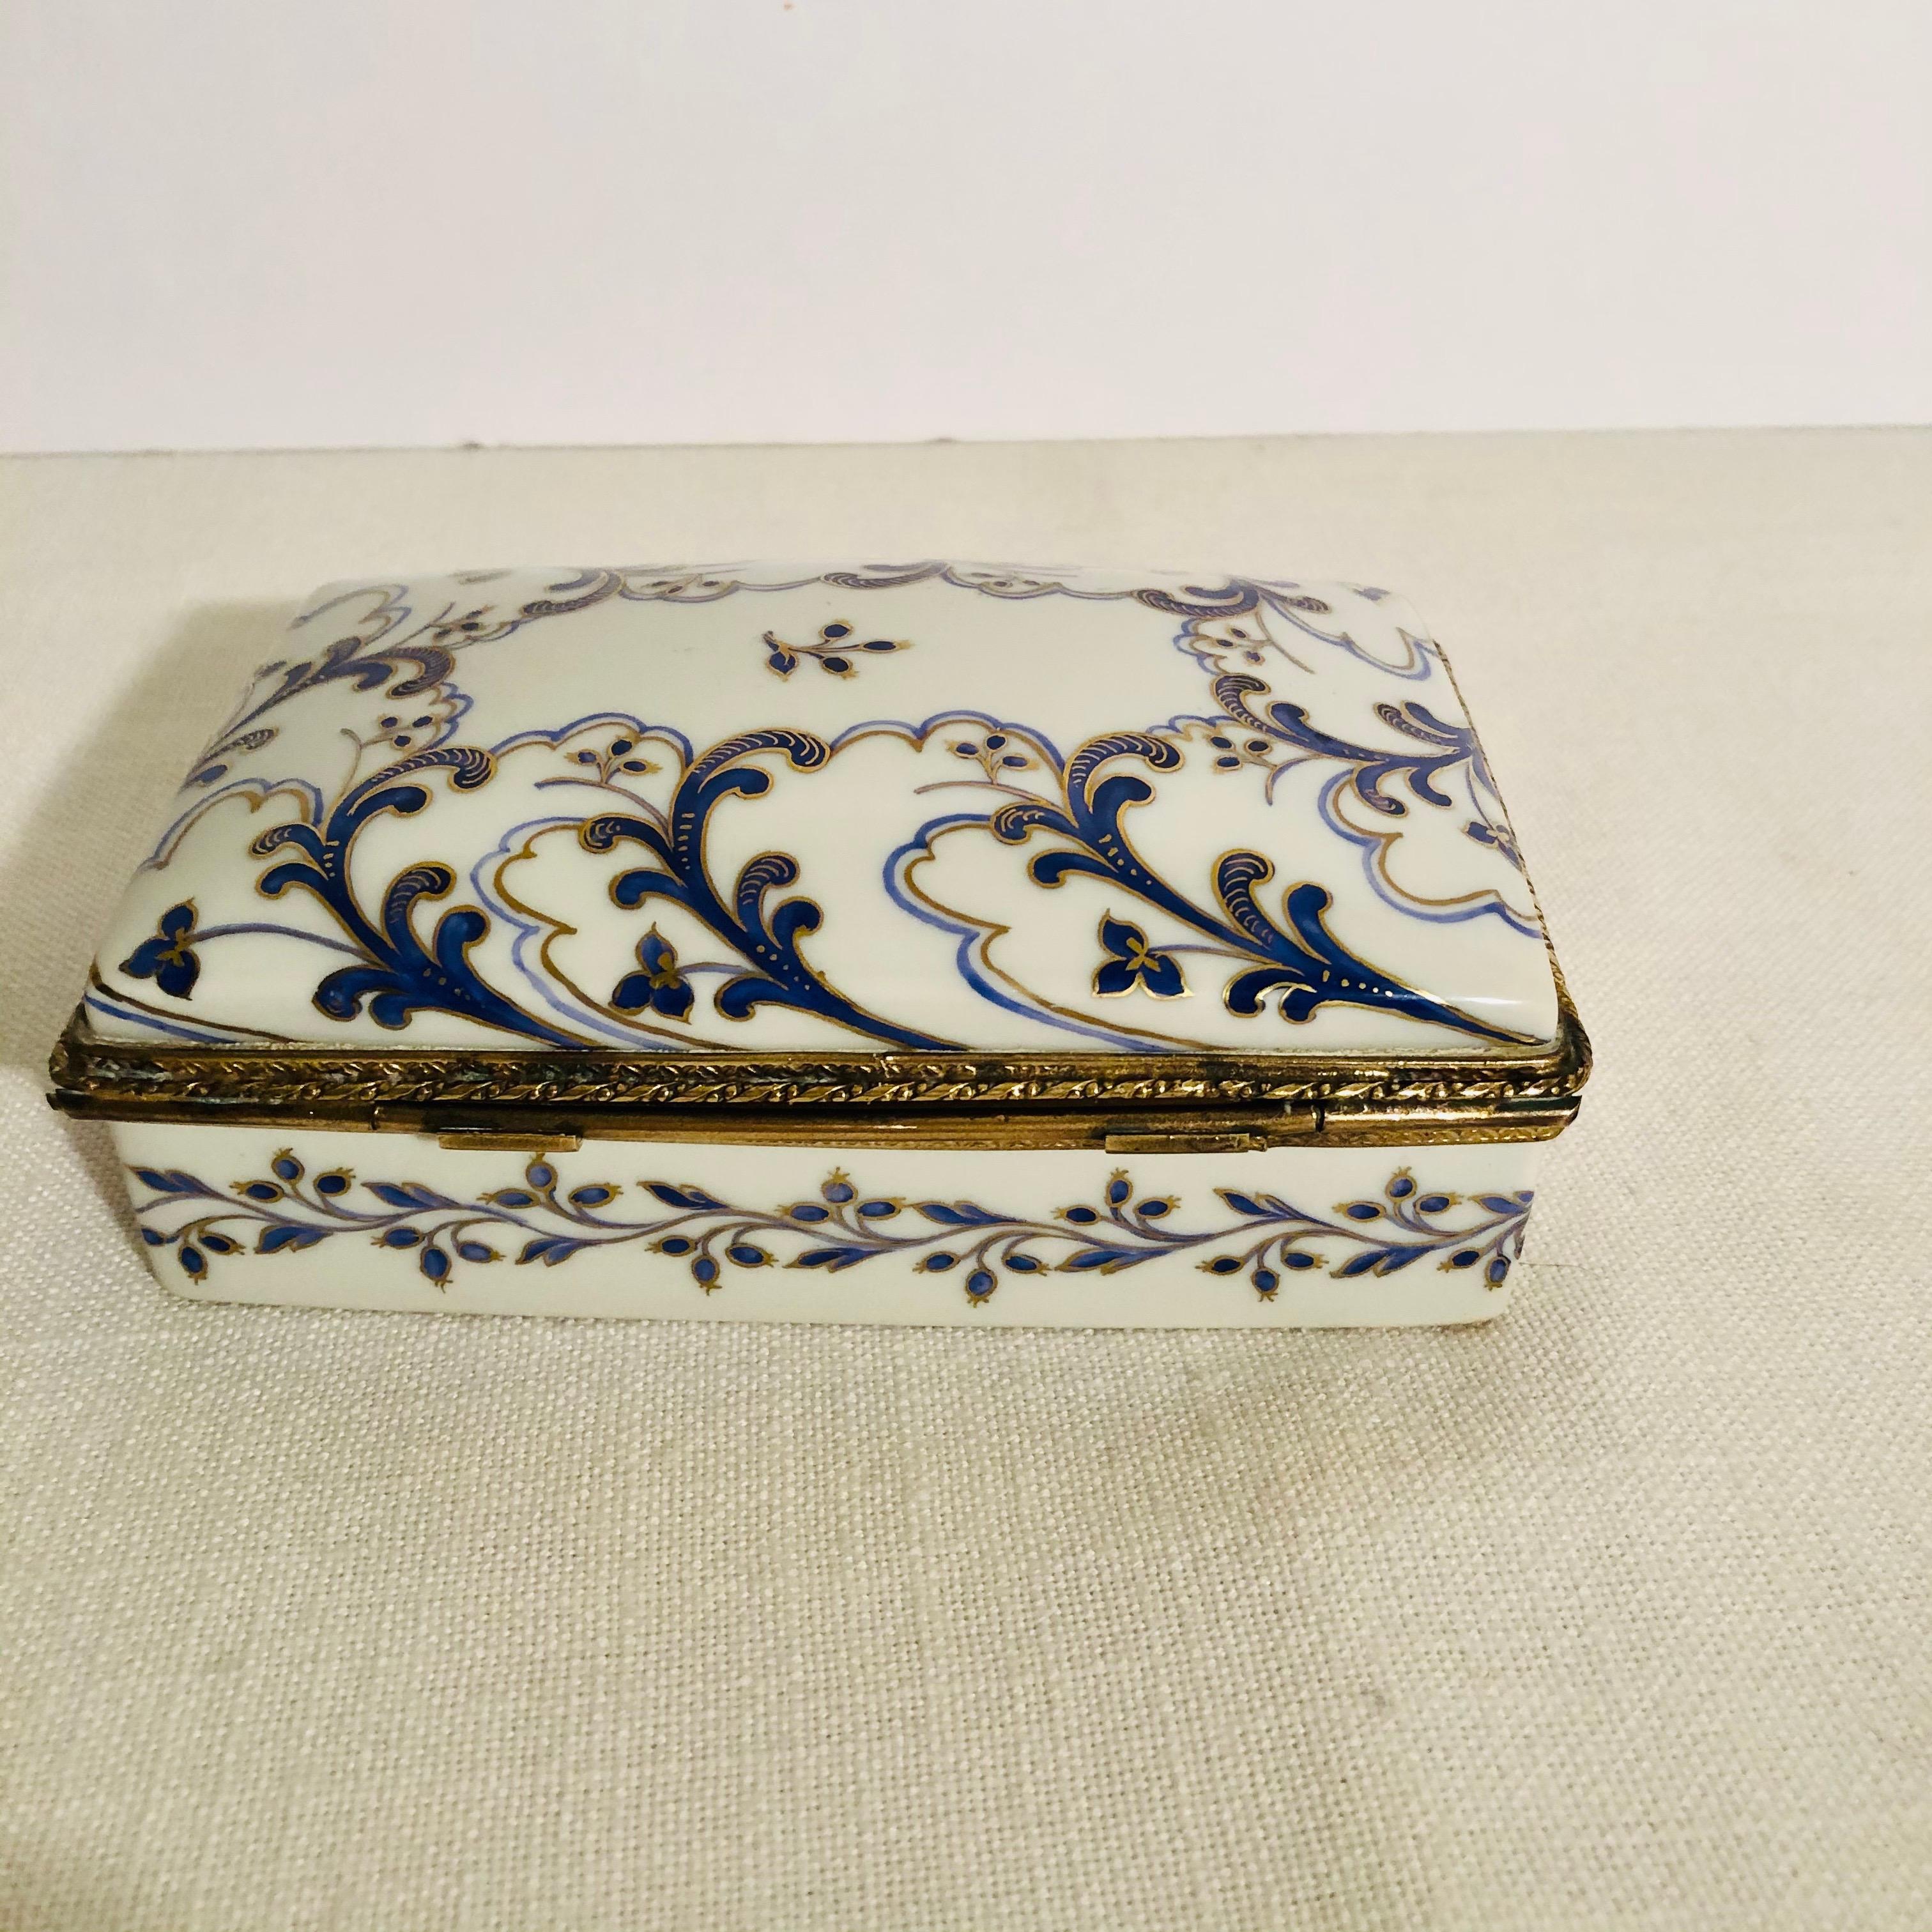 French Le Tallec Porcelain Box with Hand-Painted Cobalt and Gold Arabesque Decoration